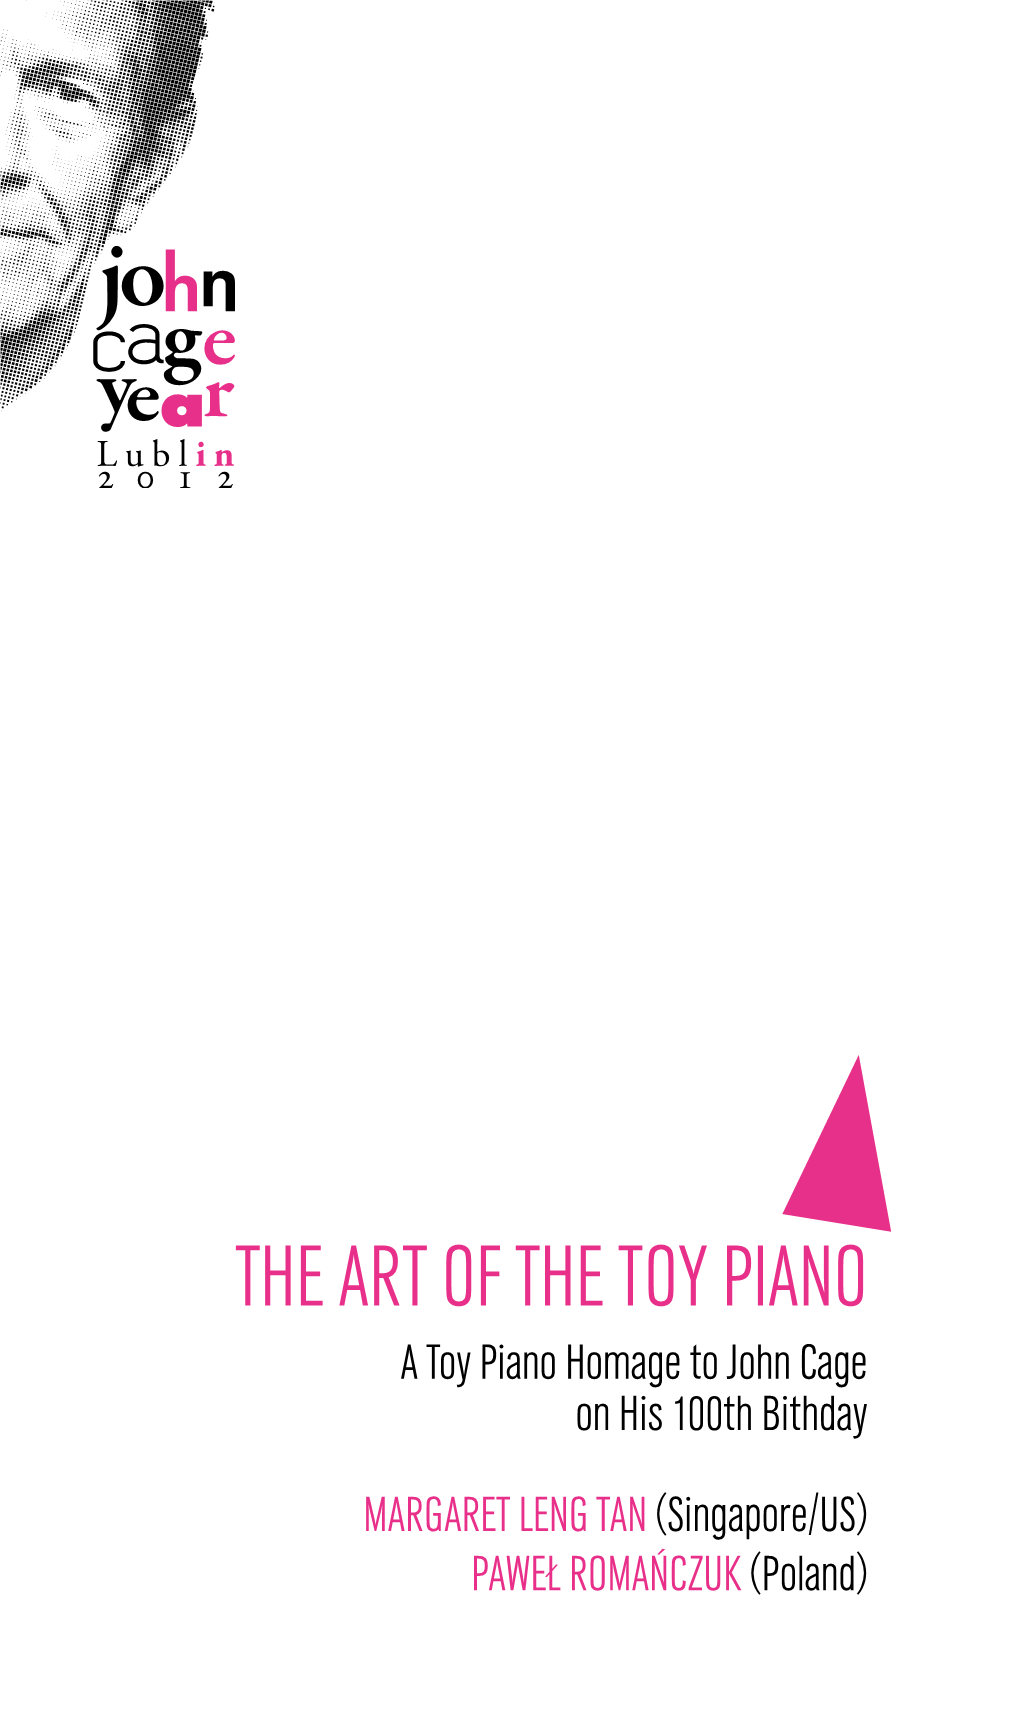 The Art of the Toy Piano